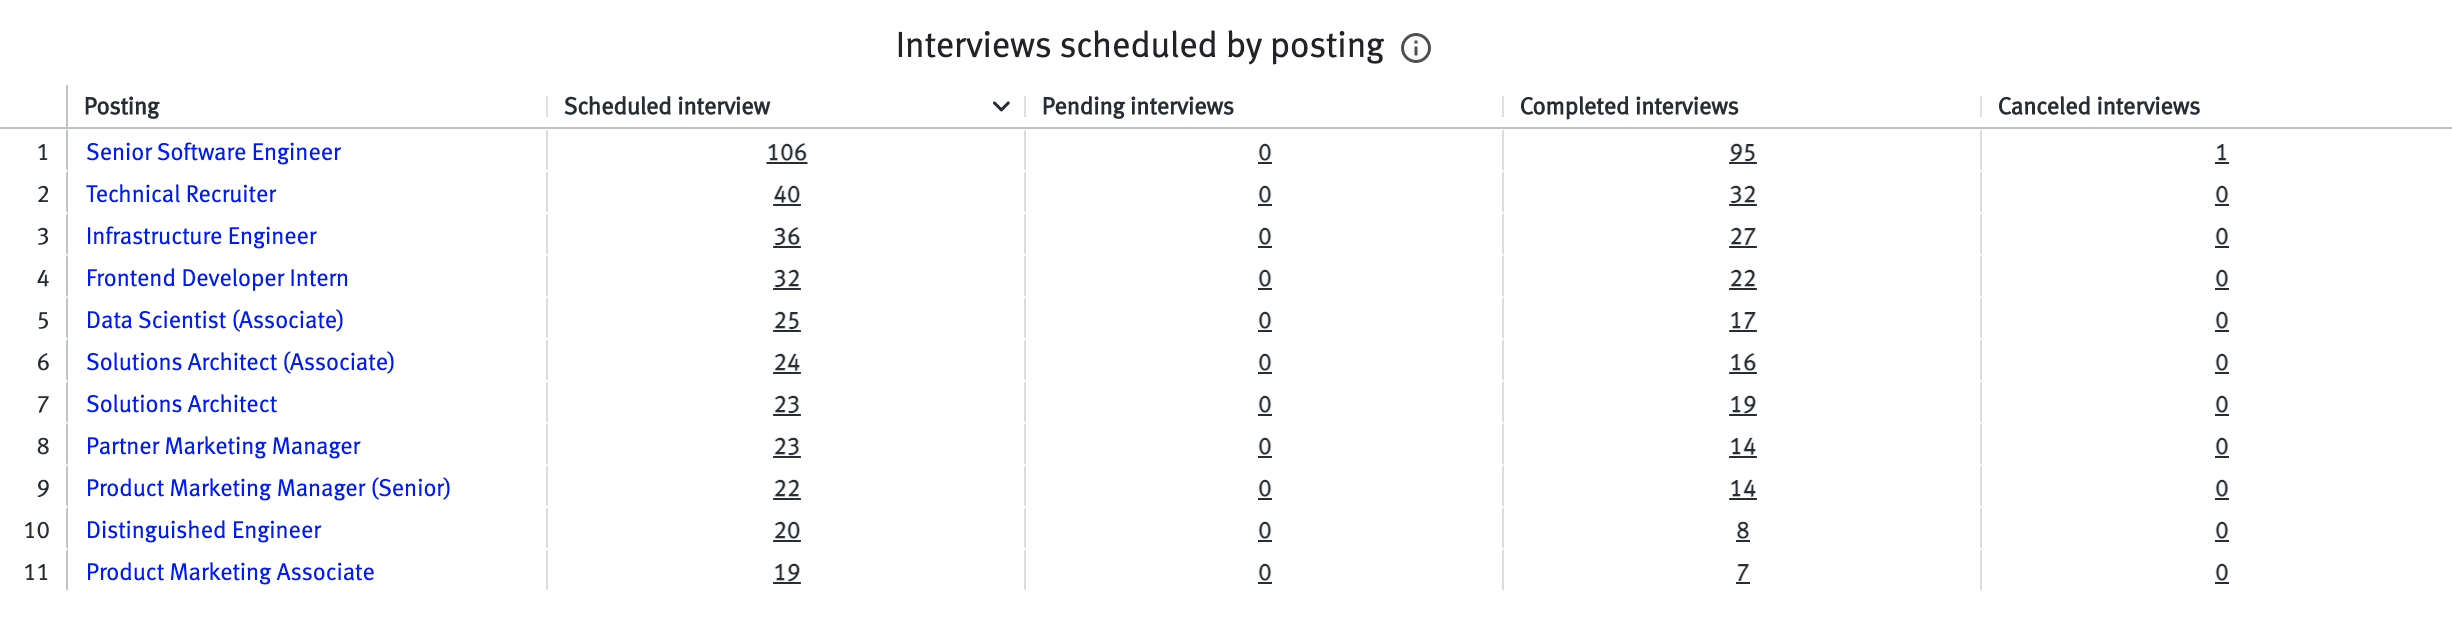 Interviews scheduled by posting table